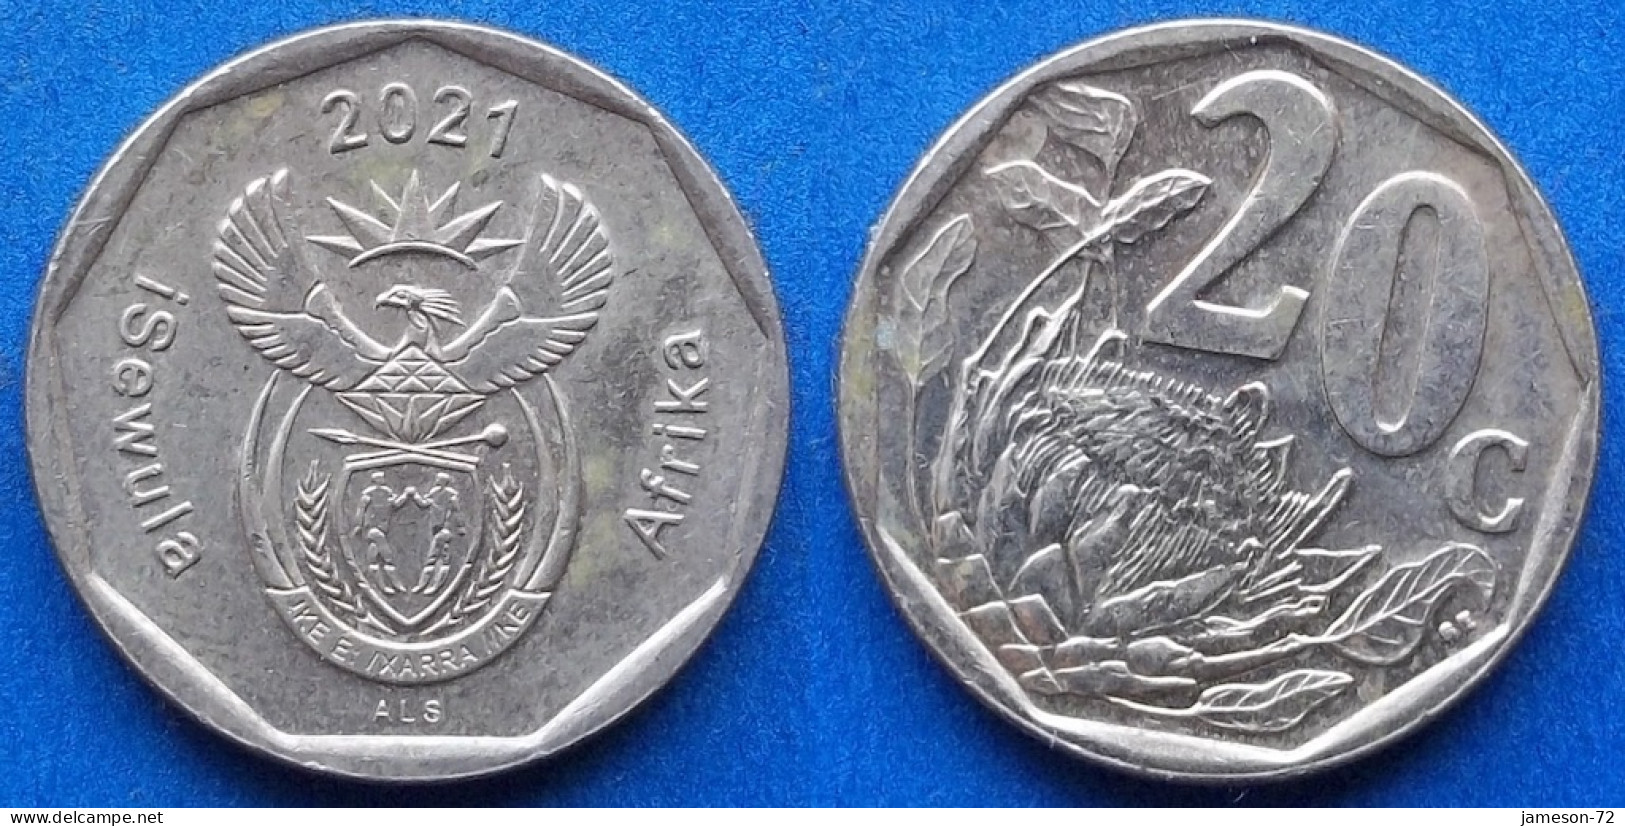 SOUTH AFRICA - 20 Cents 2021 "Protea Flower" KM# 442 Republic (1961) - Edelweiss Coins - South Africa